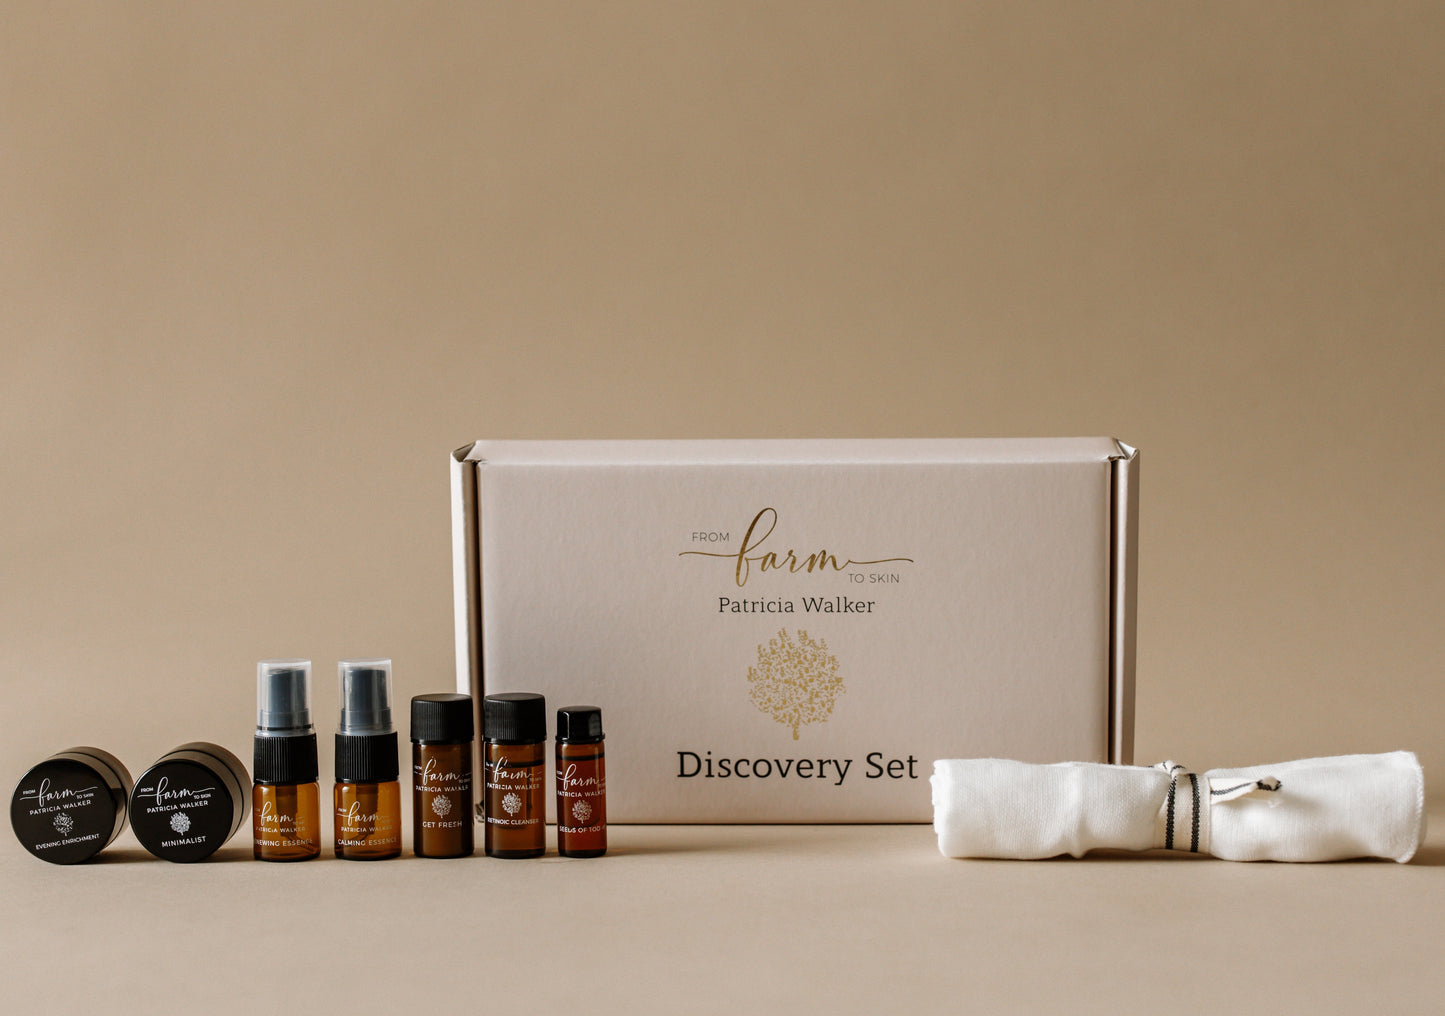 Sample Discovery Set